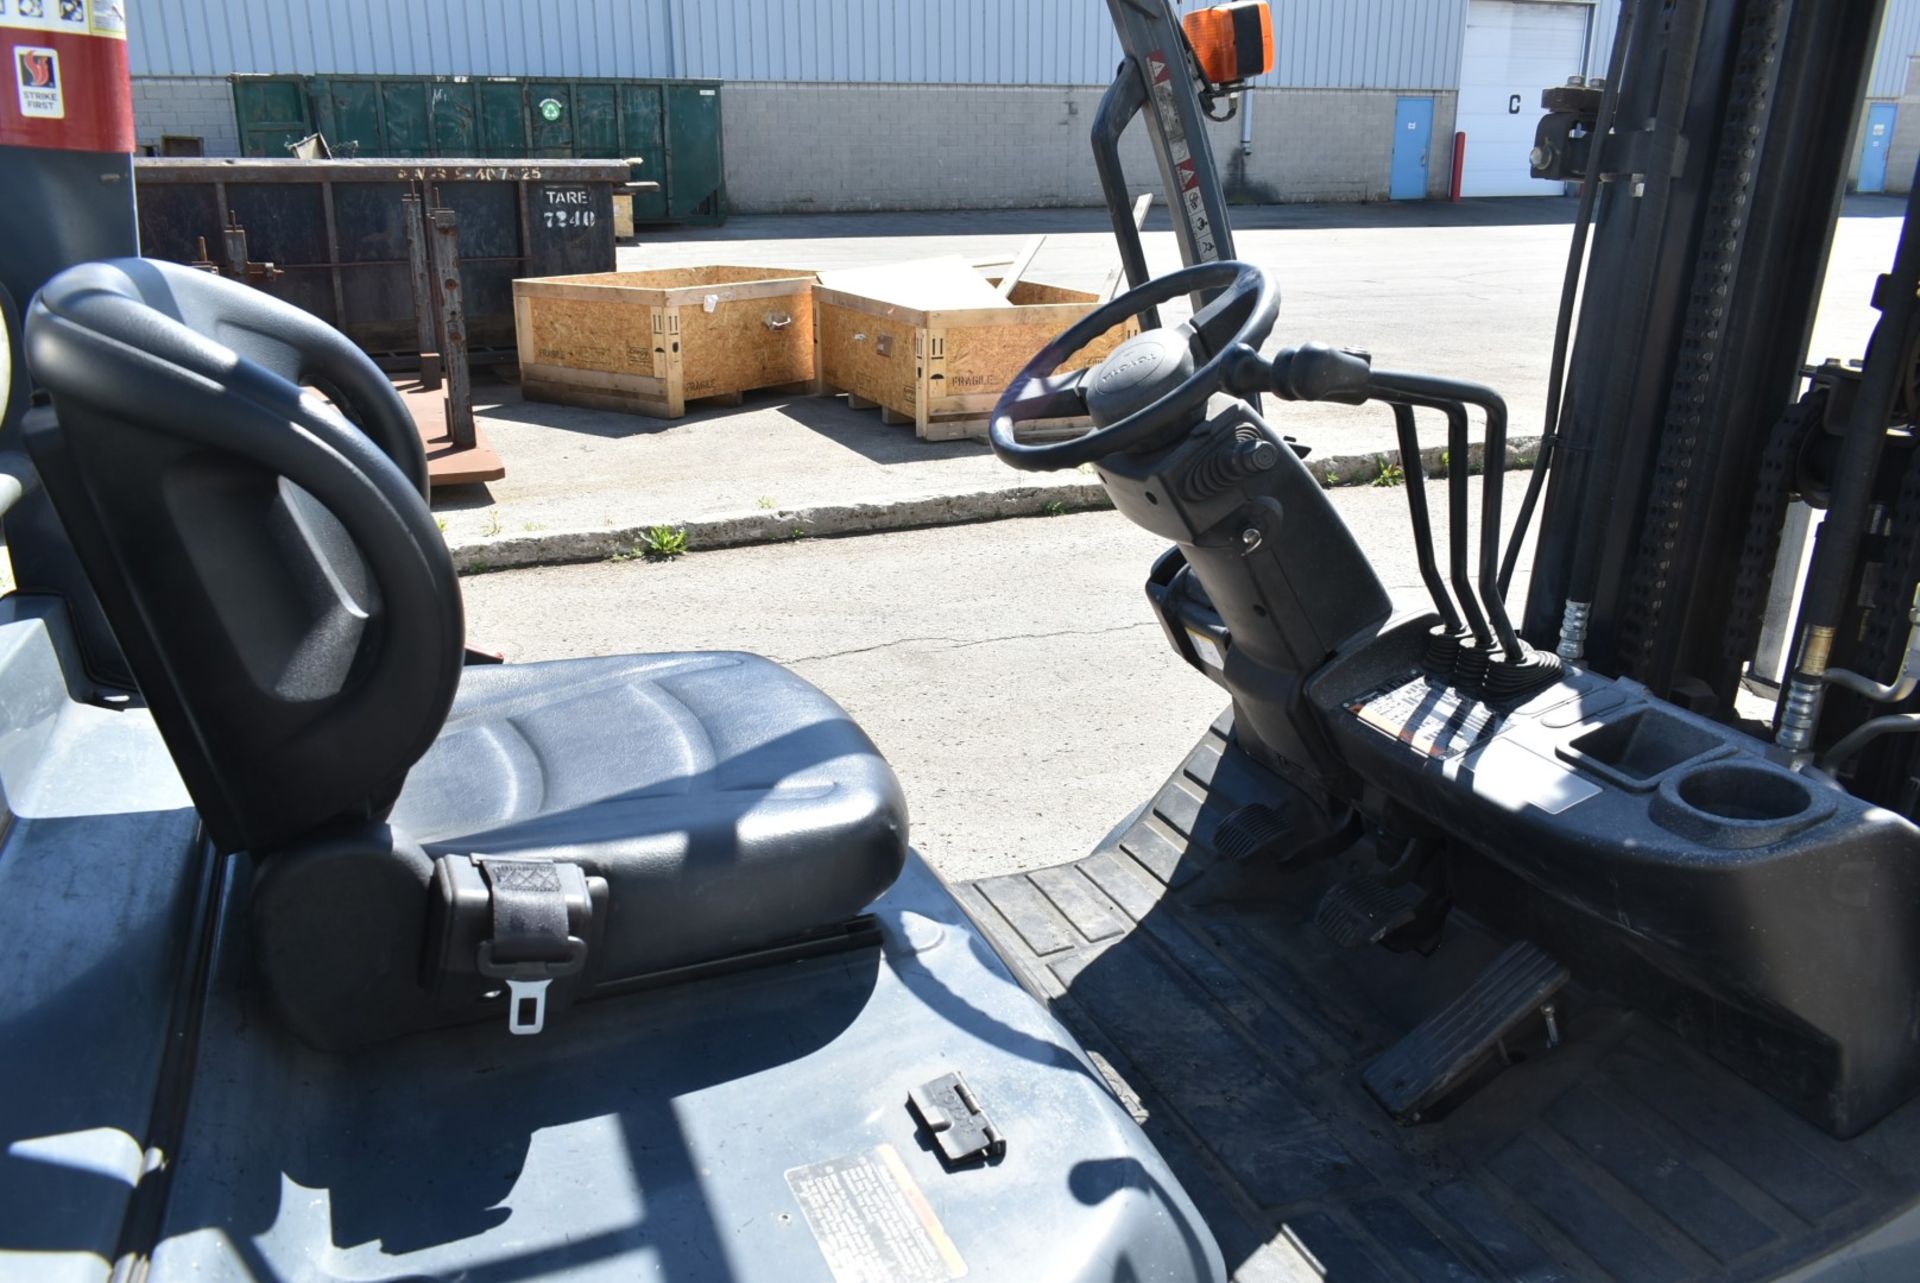 TOYOTA (2018) GC35U LPG FORKLIFT WITH 7250 LBS MAX CAPACITY, 187" 3-STAGE HIGH VISIBILITY MAST, - Image 5 of 8